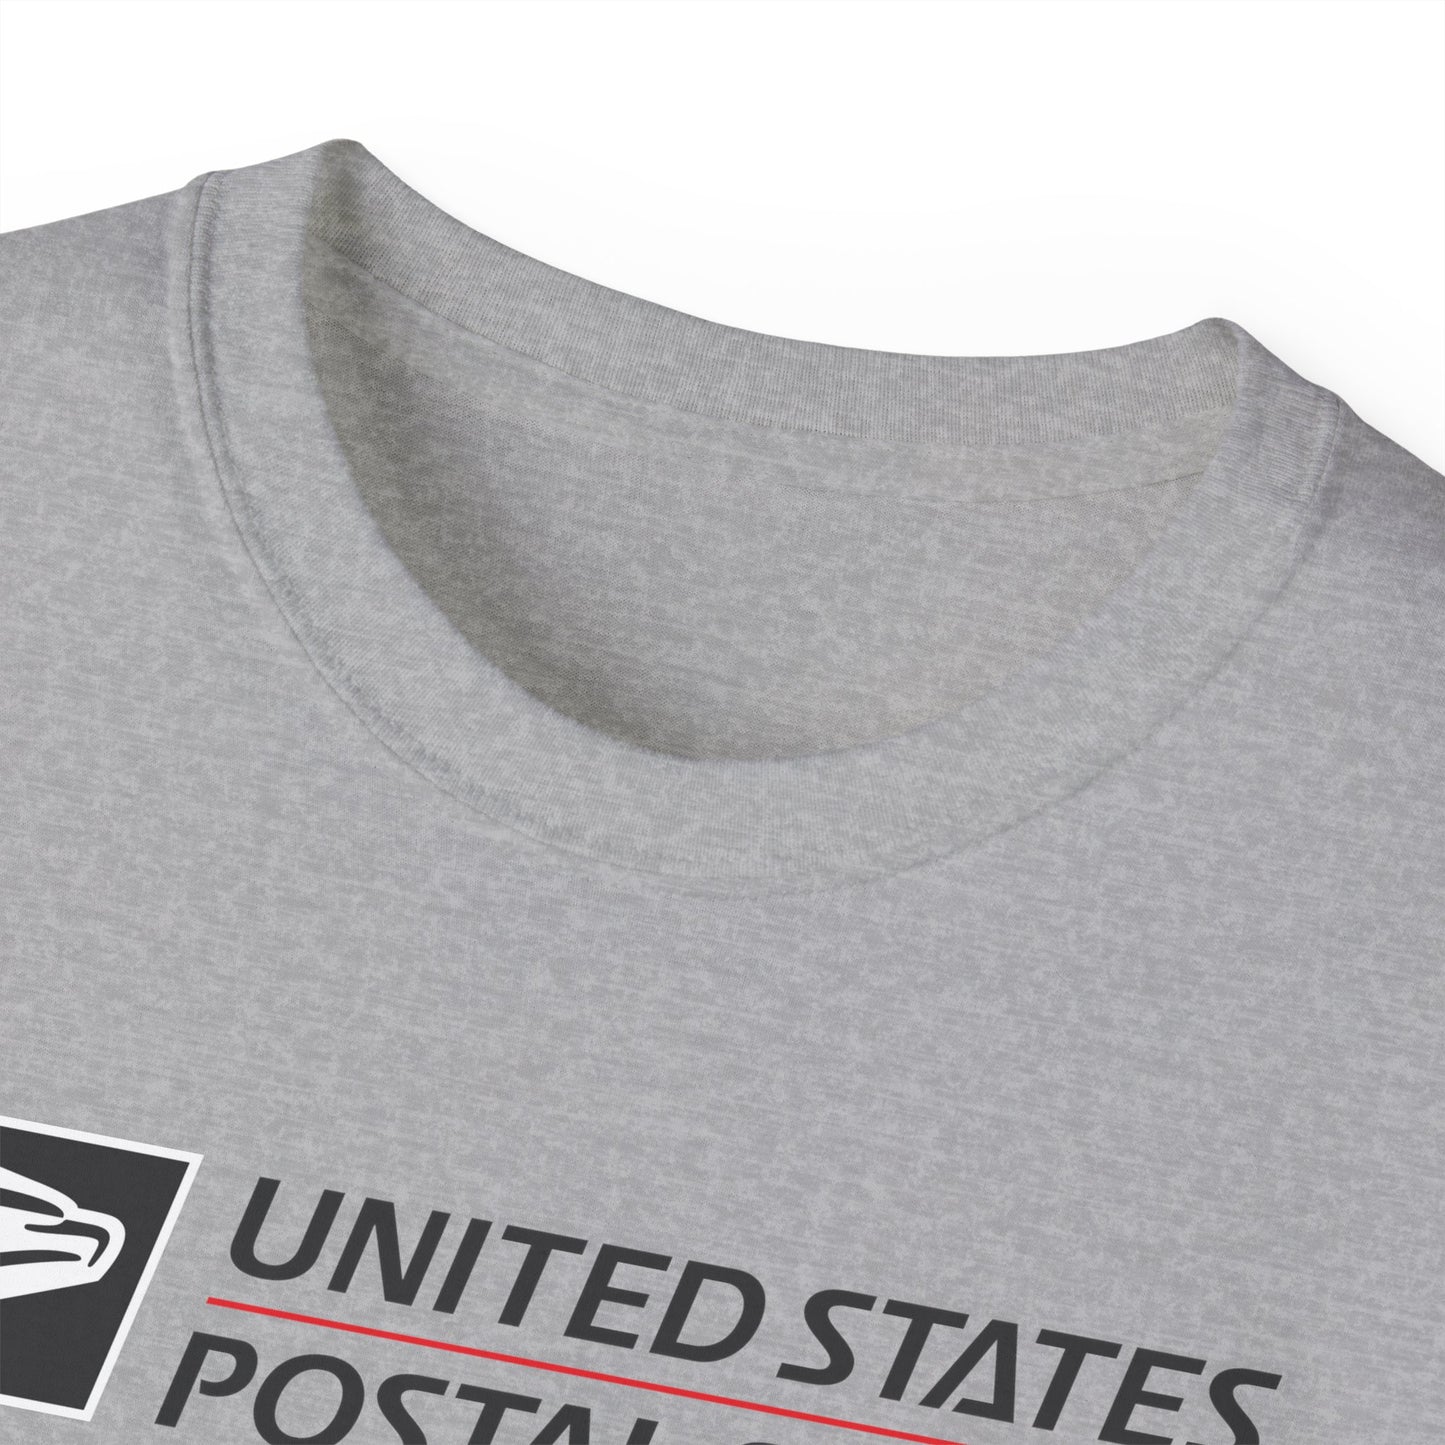 USPS Logo "Rep Your City" (Philly USPS)on sleeve Unisex T-shirt